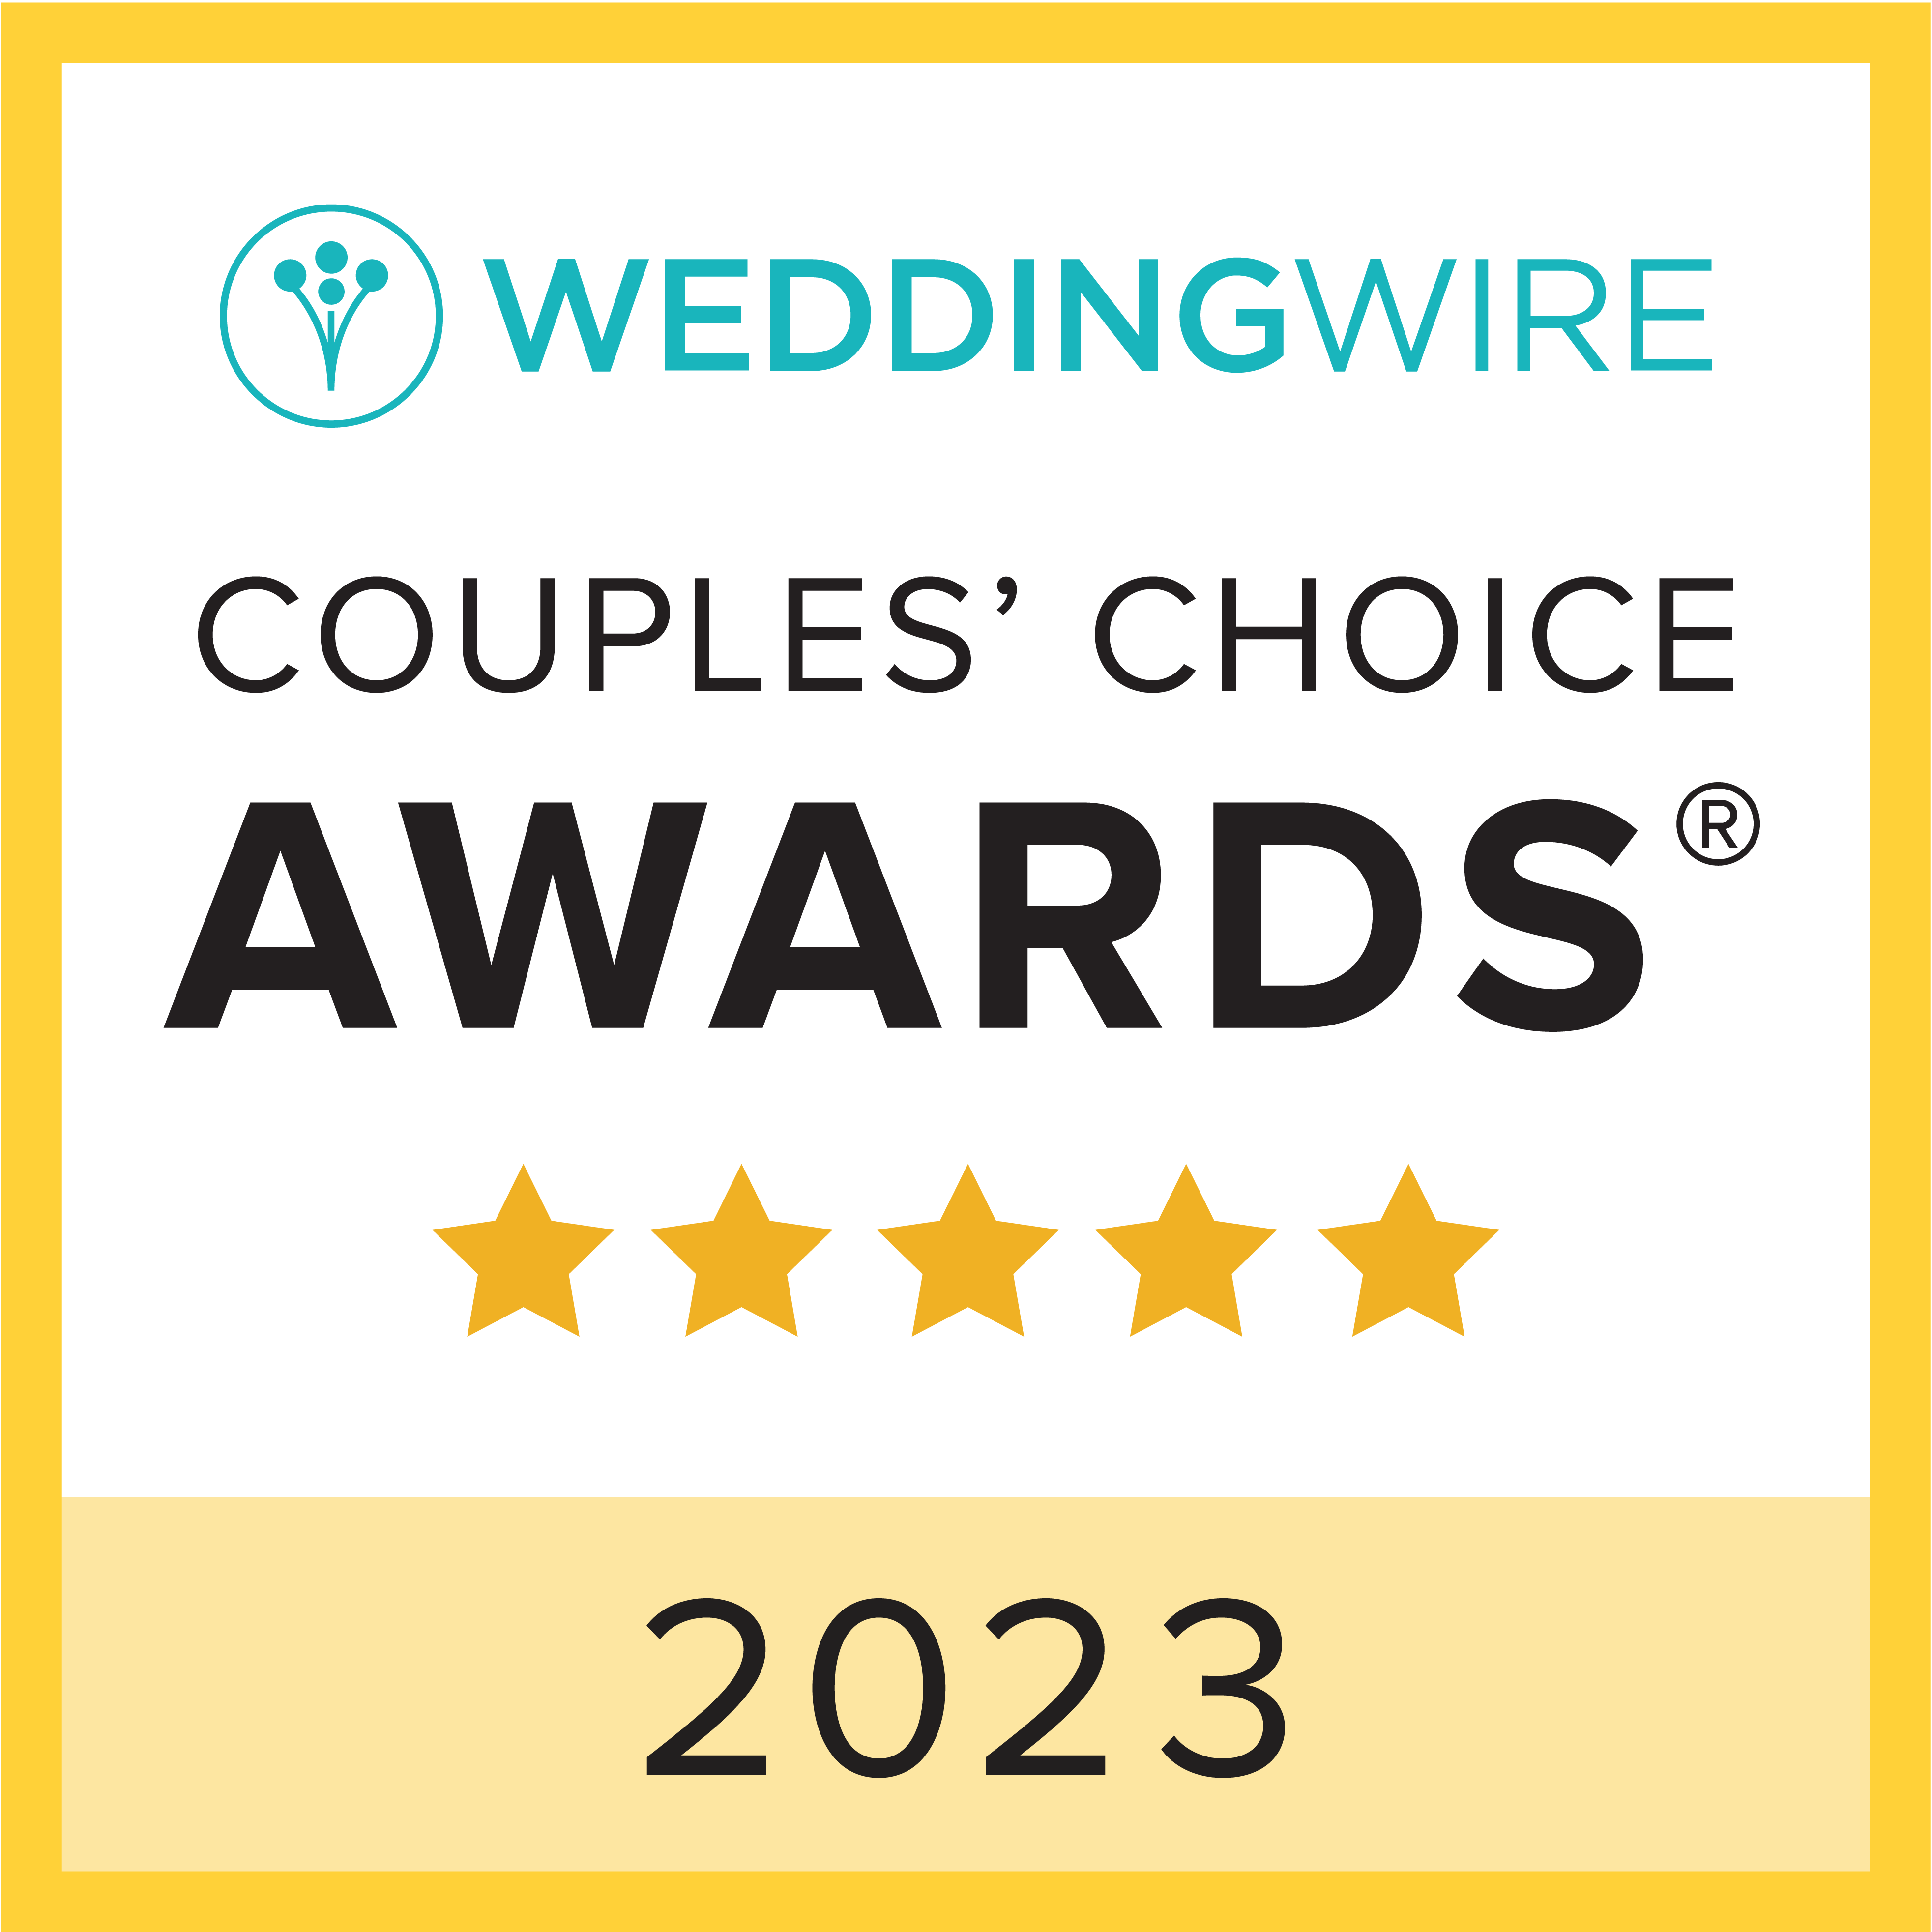 Wedding Wire Couples' Choice